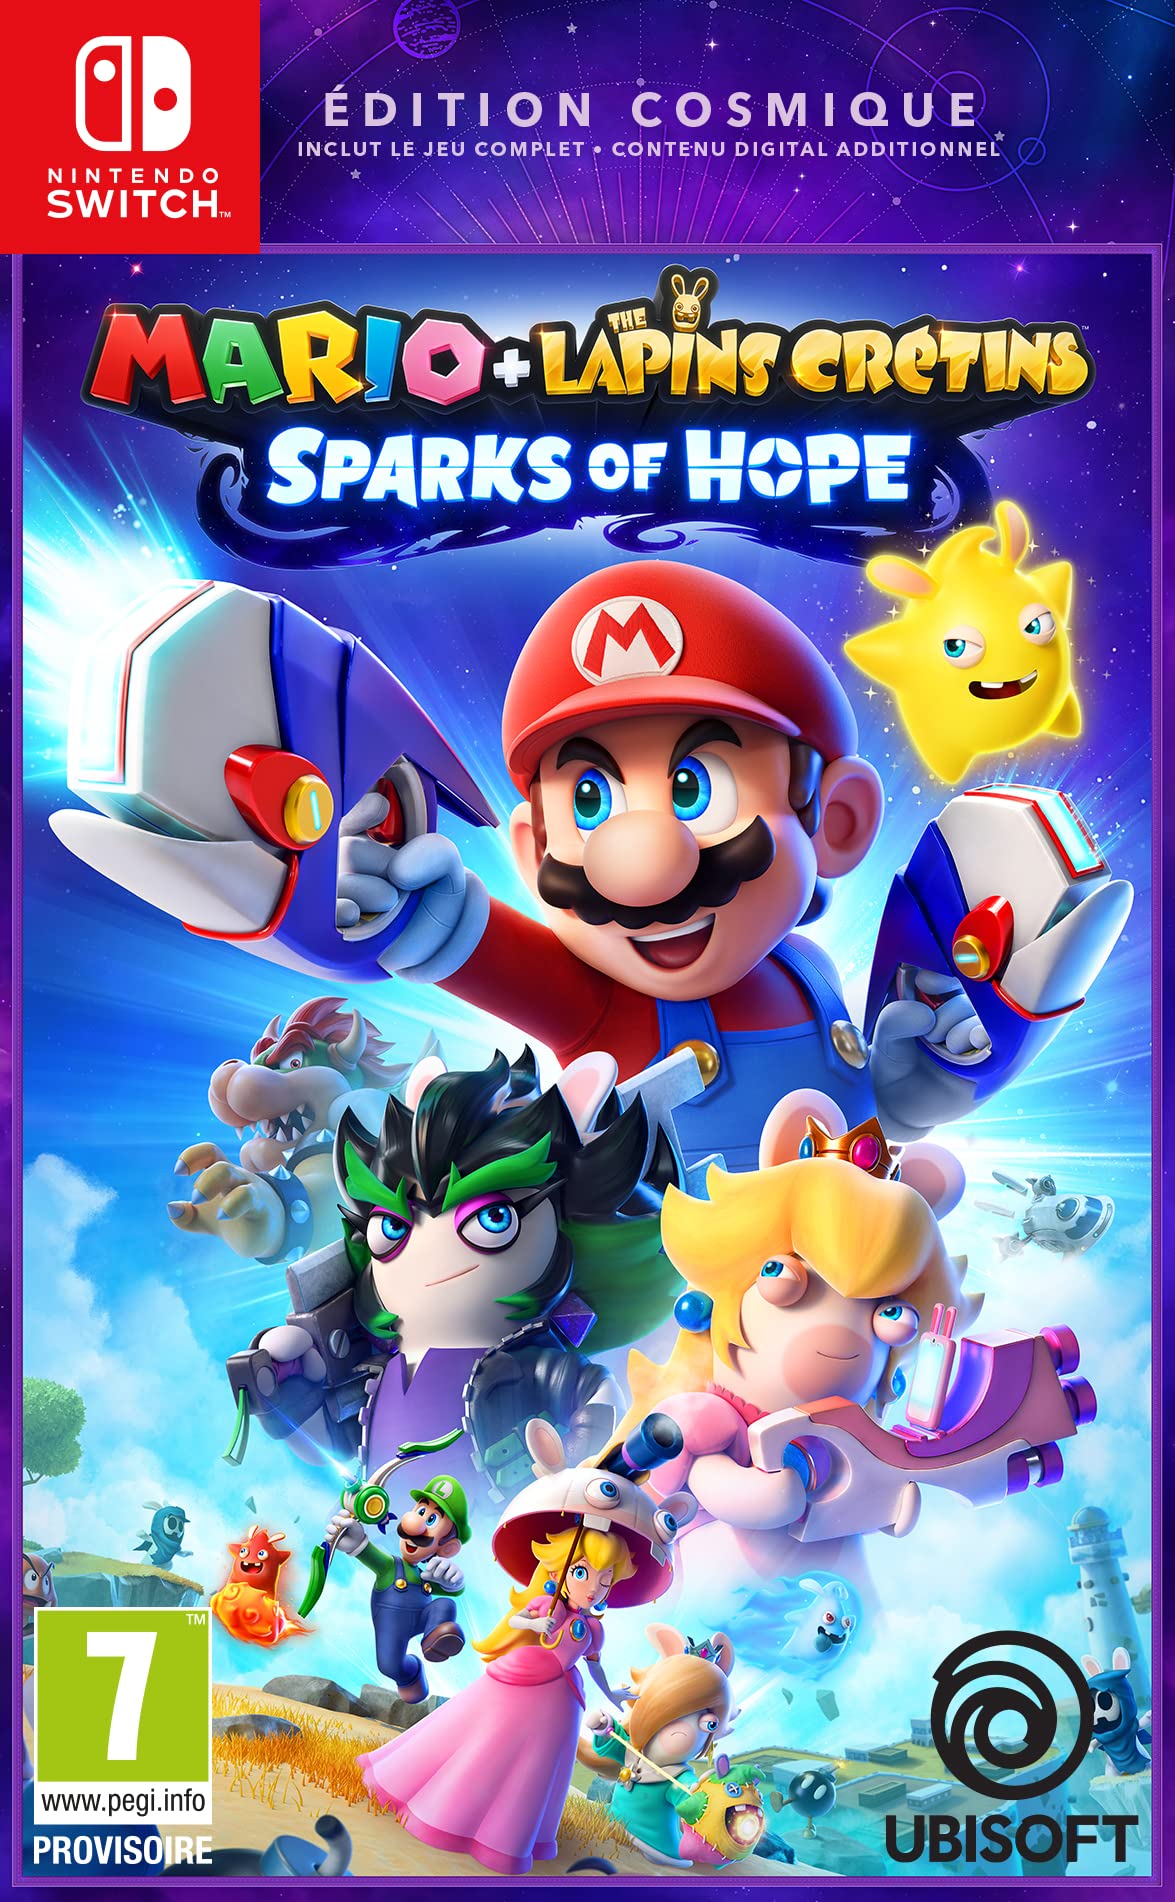 Abordable MARIO, THE LAPINS CRÉTINS, SPARKS OF HOPE ÉDITION COSMIQUE SWITCH Pbe8RmGjY à vendre